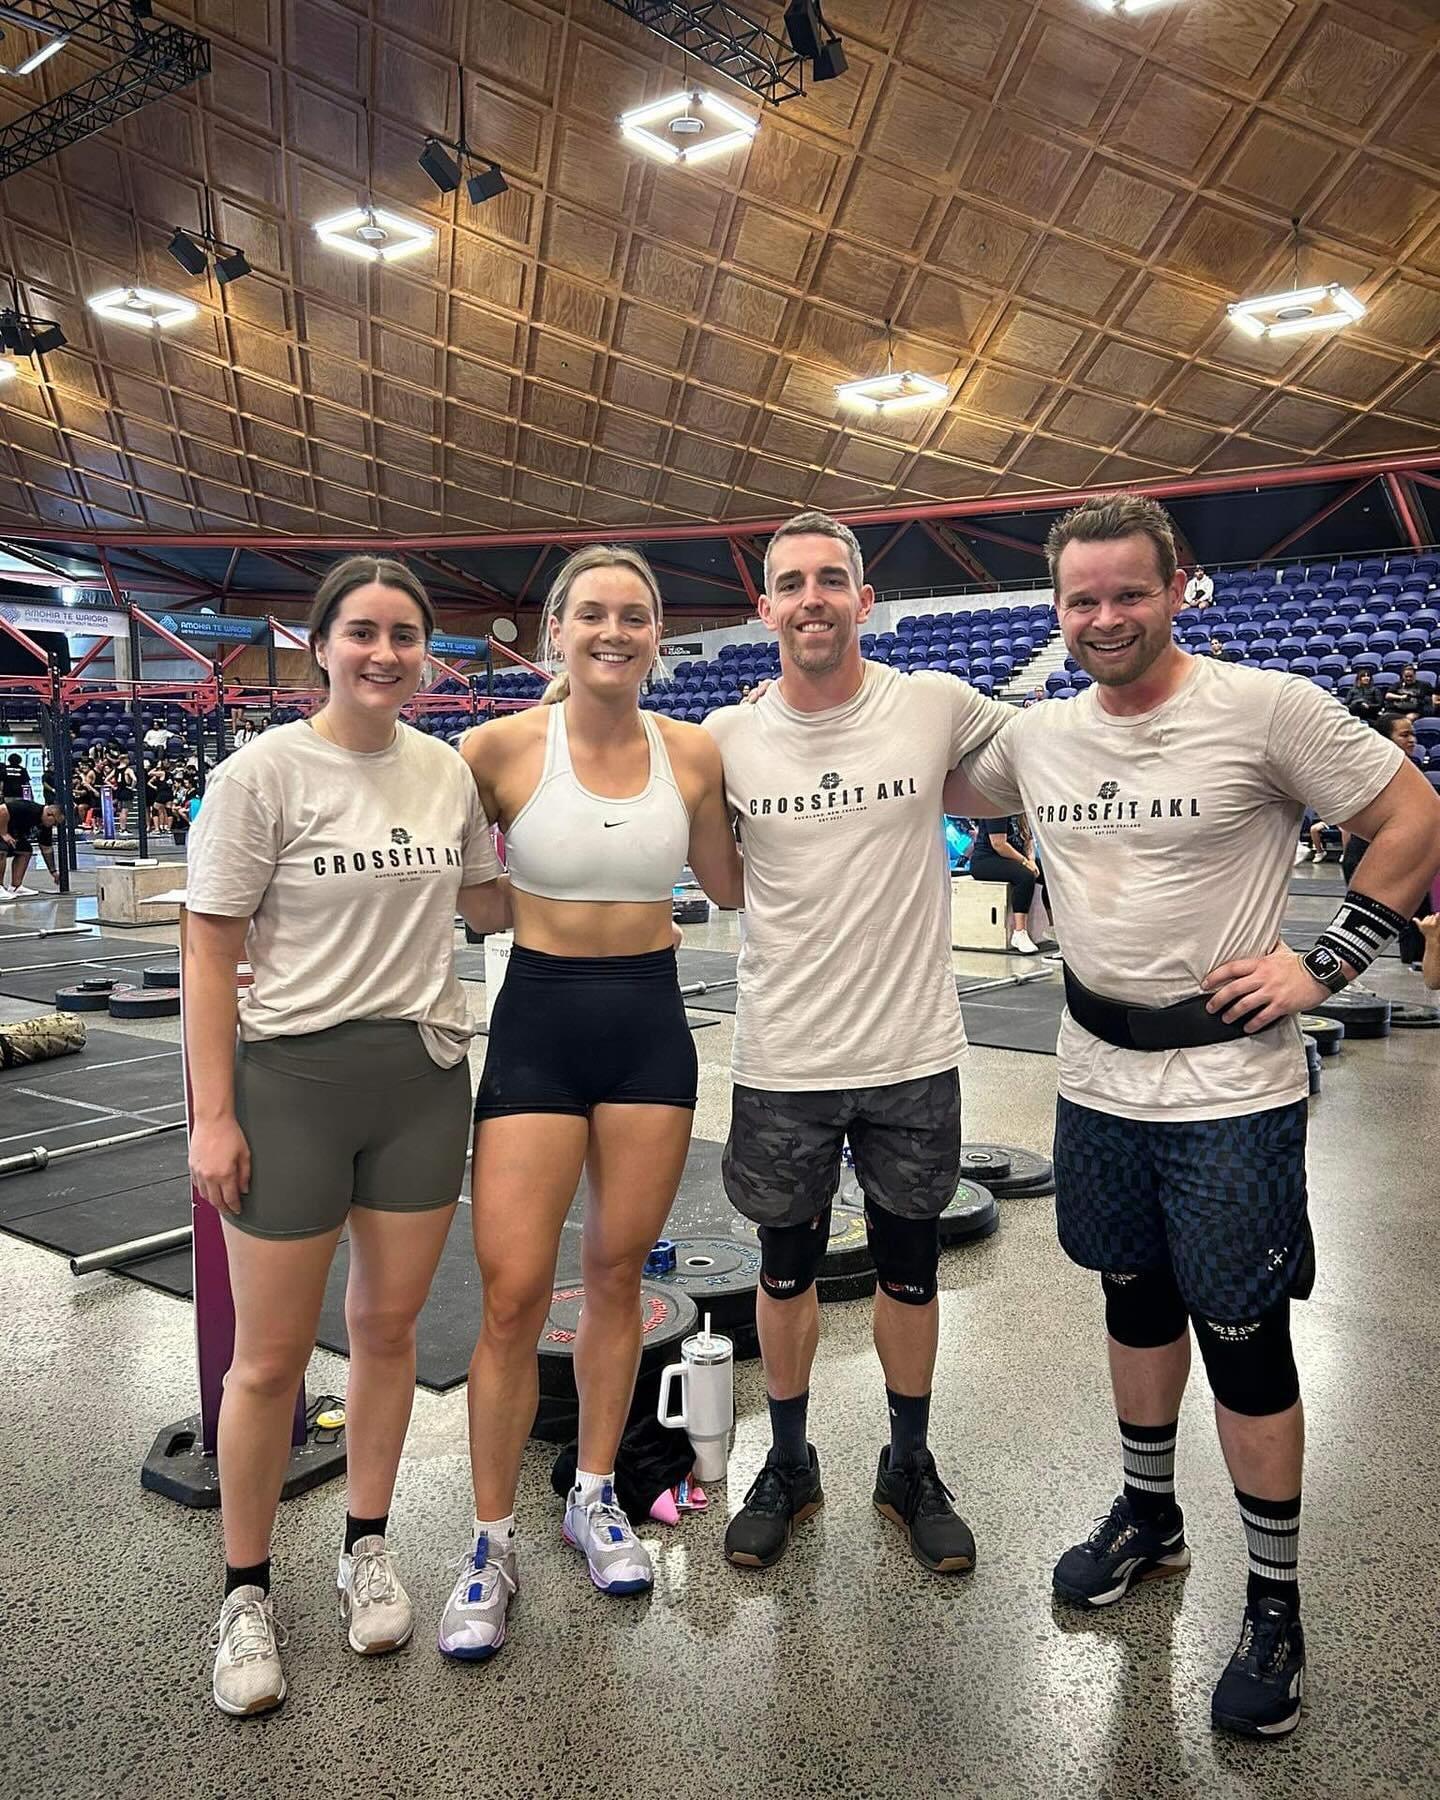 🔥 Massive shout out to Team AK-LFG 🔥
Getting out on the competition floor at &ldquo;The Discipline Games&rdquo; on Sunday and representing AKL like the bloody legends they are. They did AKL and themselves proud and with it being the first comp for 